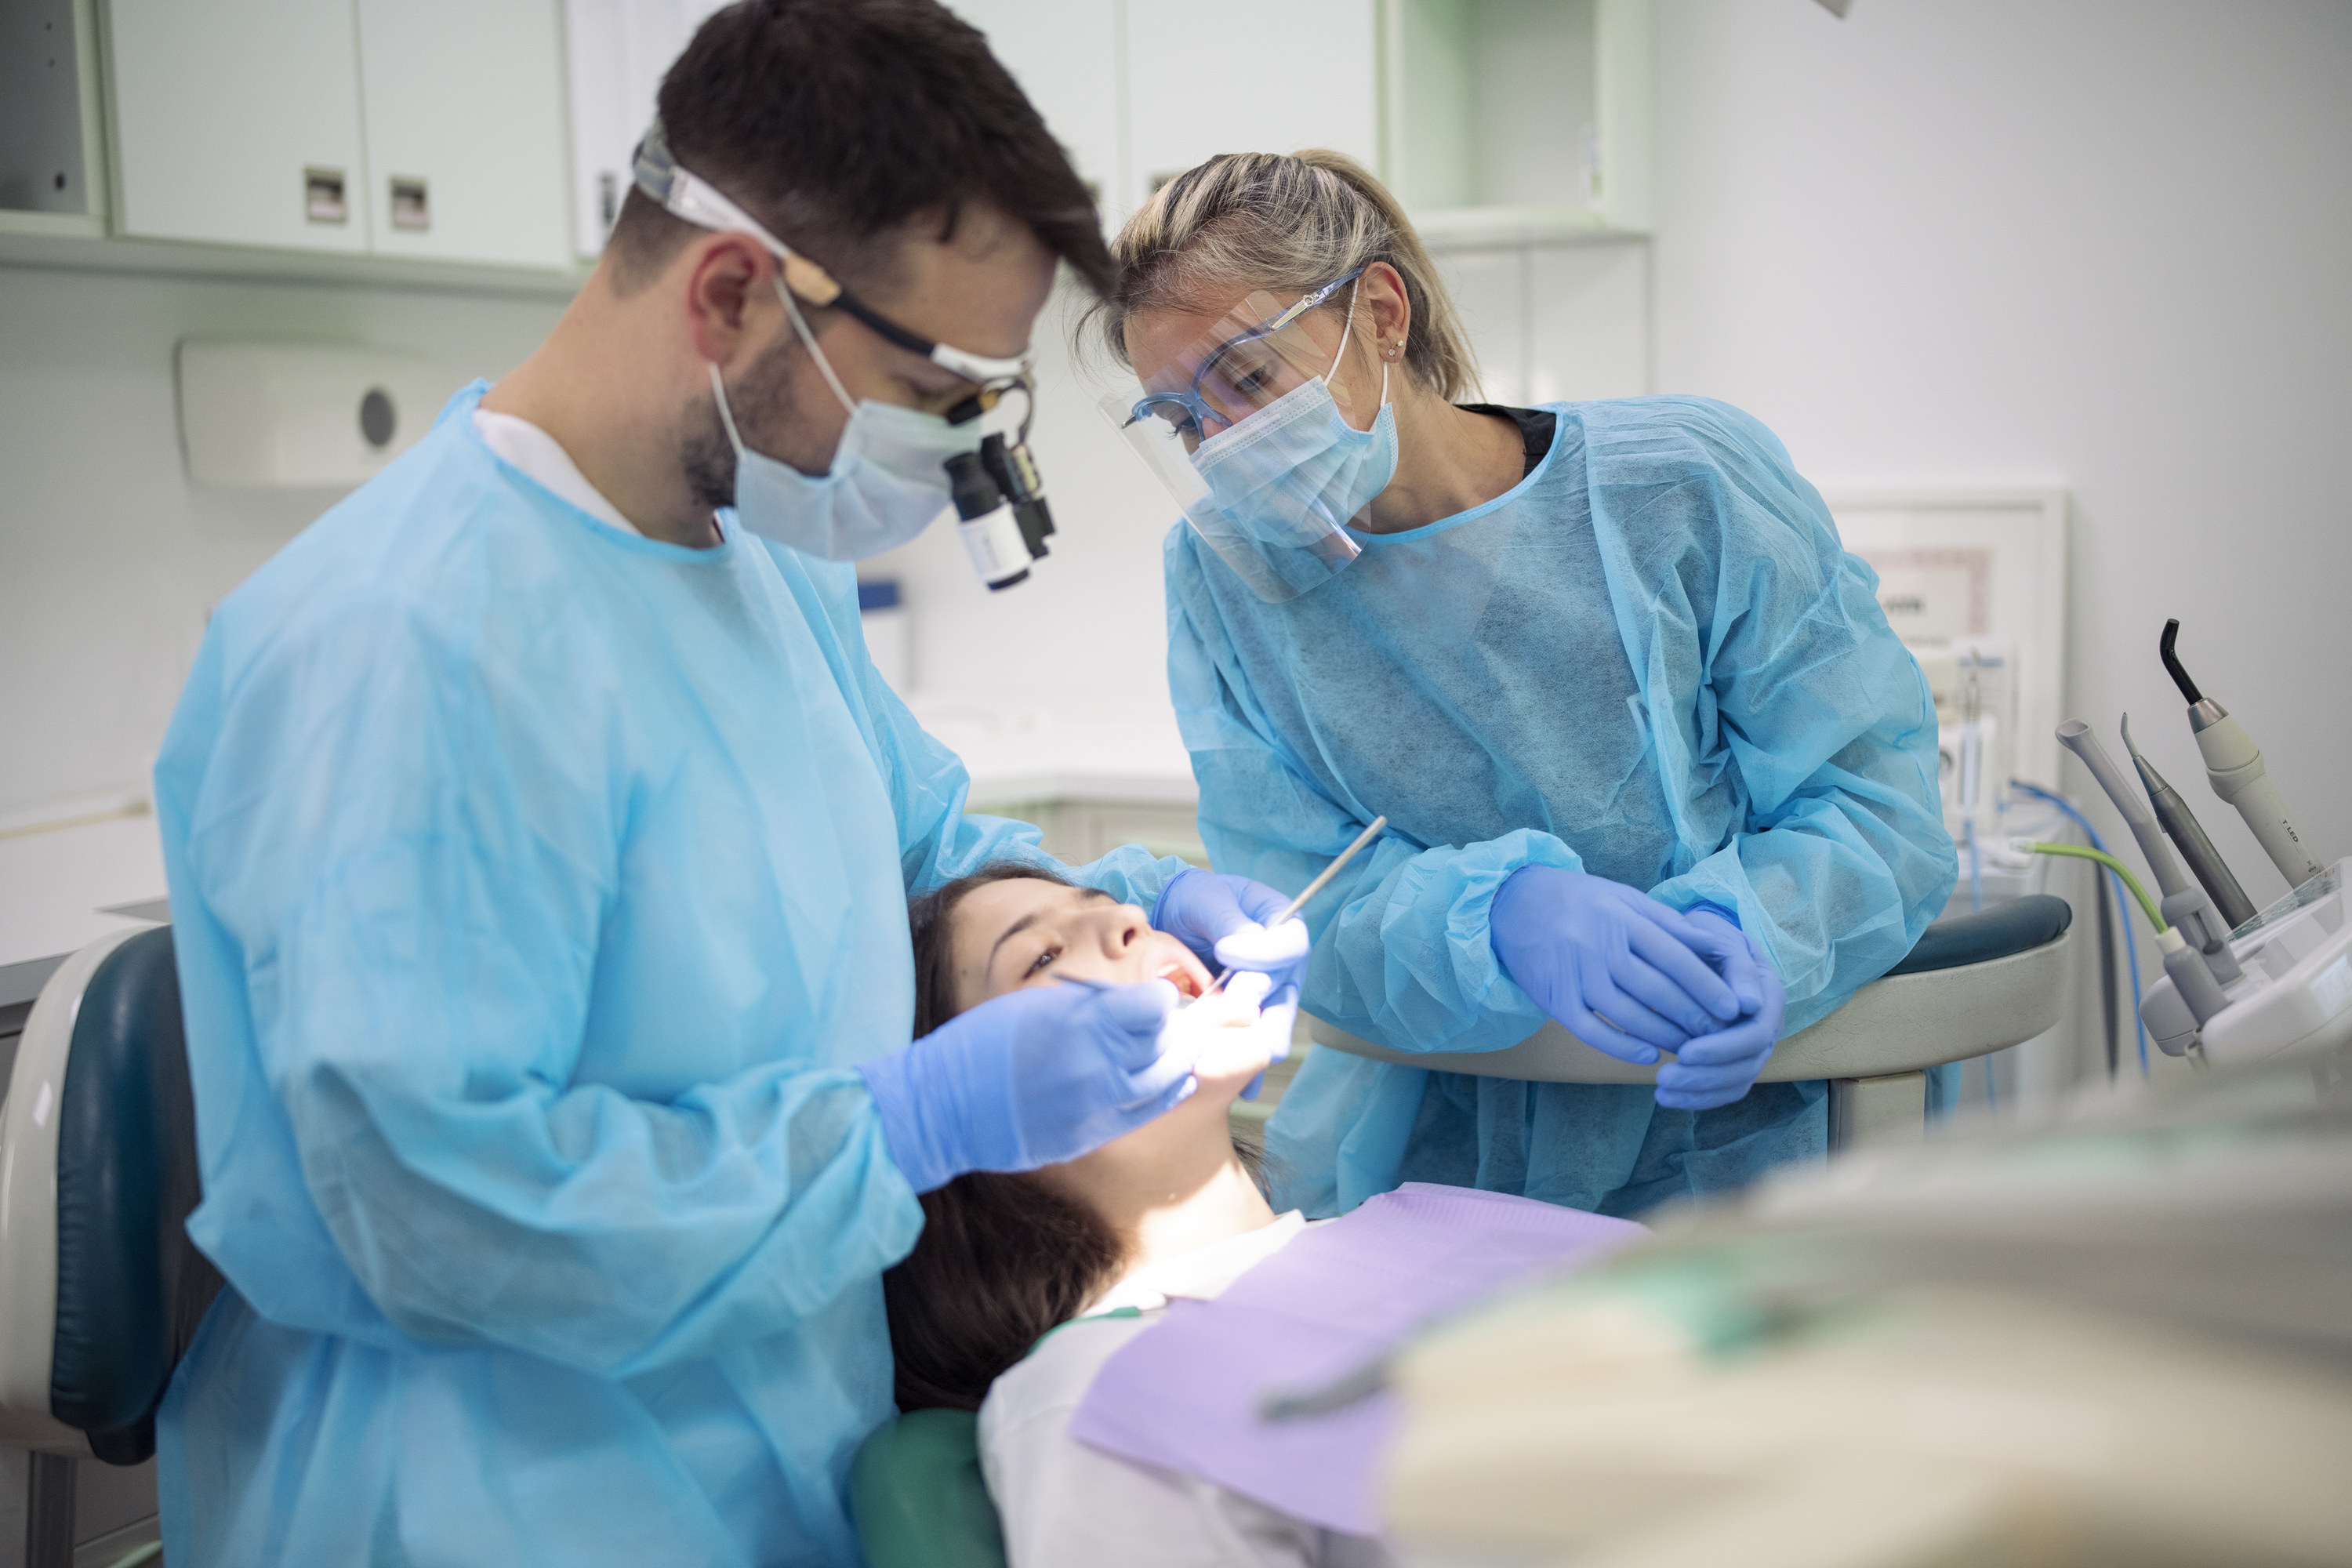 Dentist and assistant working on a patient